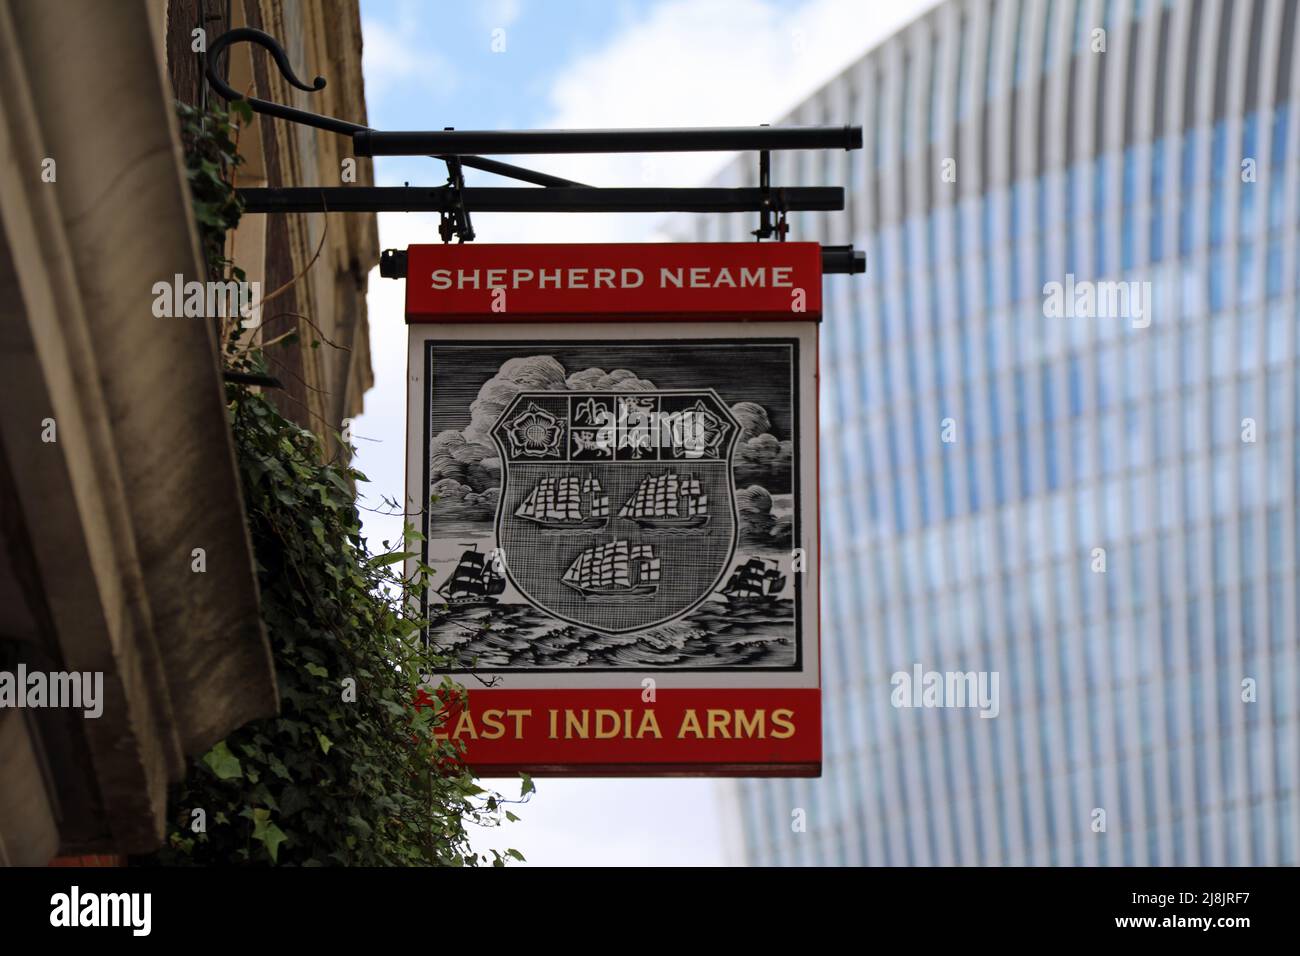 East India Arms at Fenchurch Street in the financial district of London Stock Photo